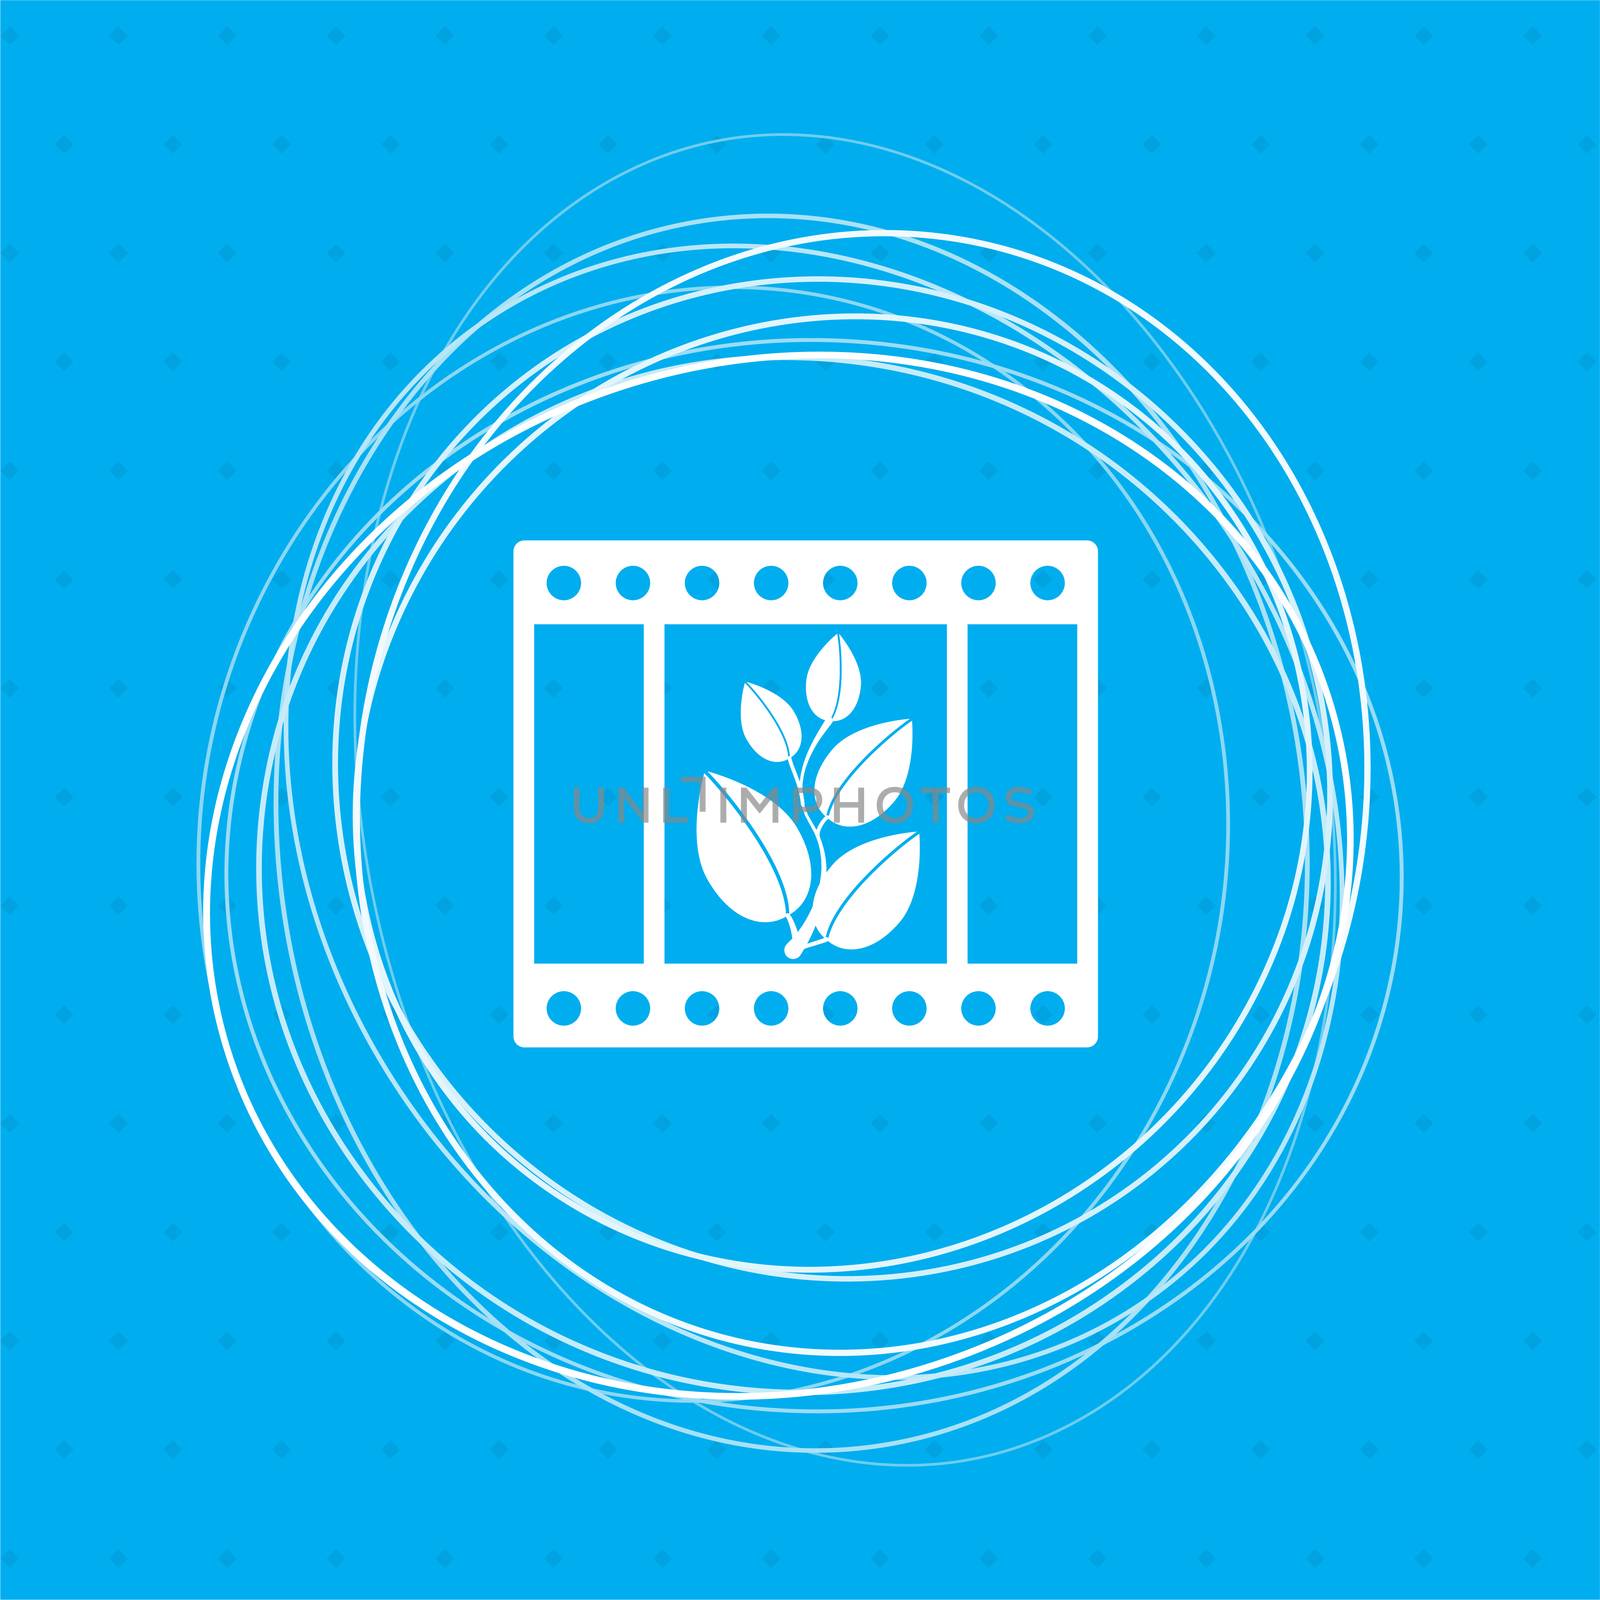 film Icon on a blue background with abstract circles around and place for your text. illustration